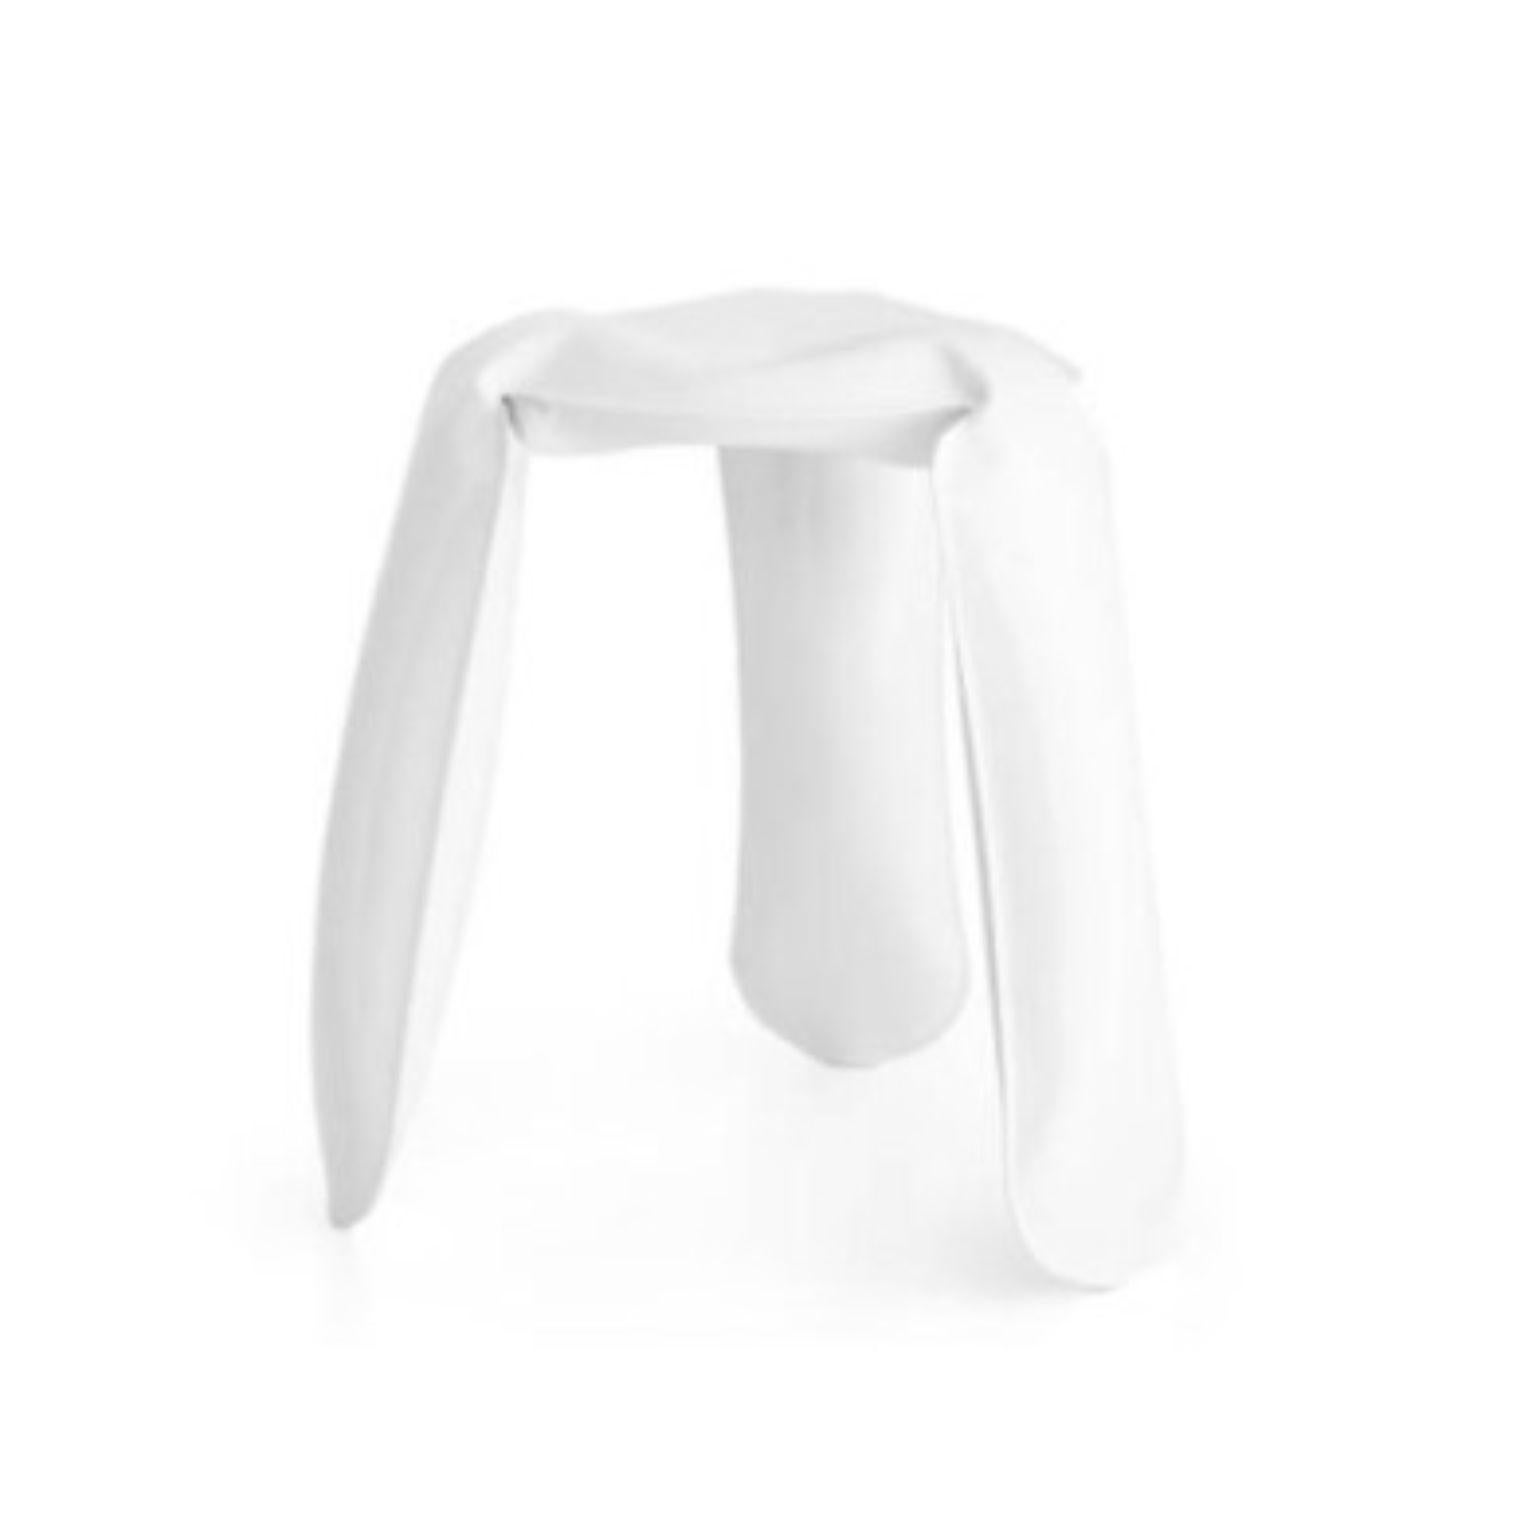 White mini plopp stool by Zieta
Dimensions: D 25 x H 38 cm 
Material: Carbon steel. 
Finish: Powder-coated. 
Available in colors: strawberry red, water blue, yellow glossy, flamed gold, and deep space blue. Available in stainless steel, aluminum,